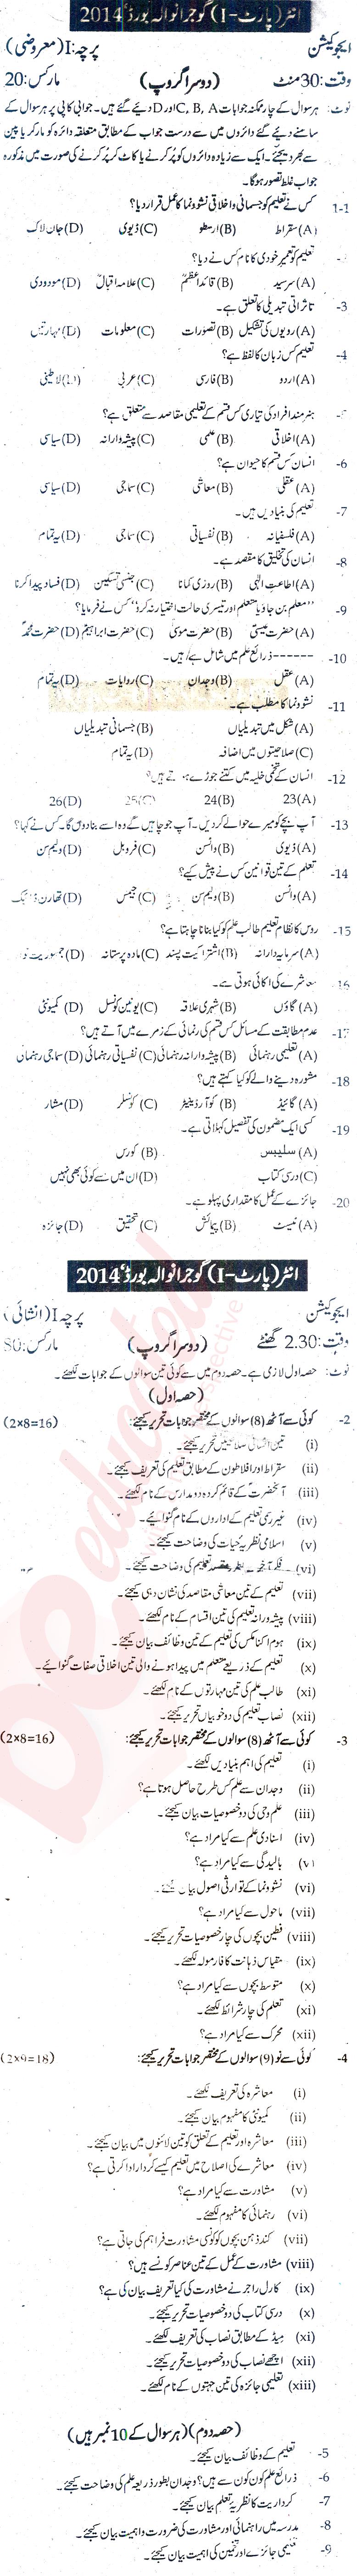 Education FA Part 1 Past Paper Group 2 BISE Gujranwala 2014